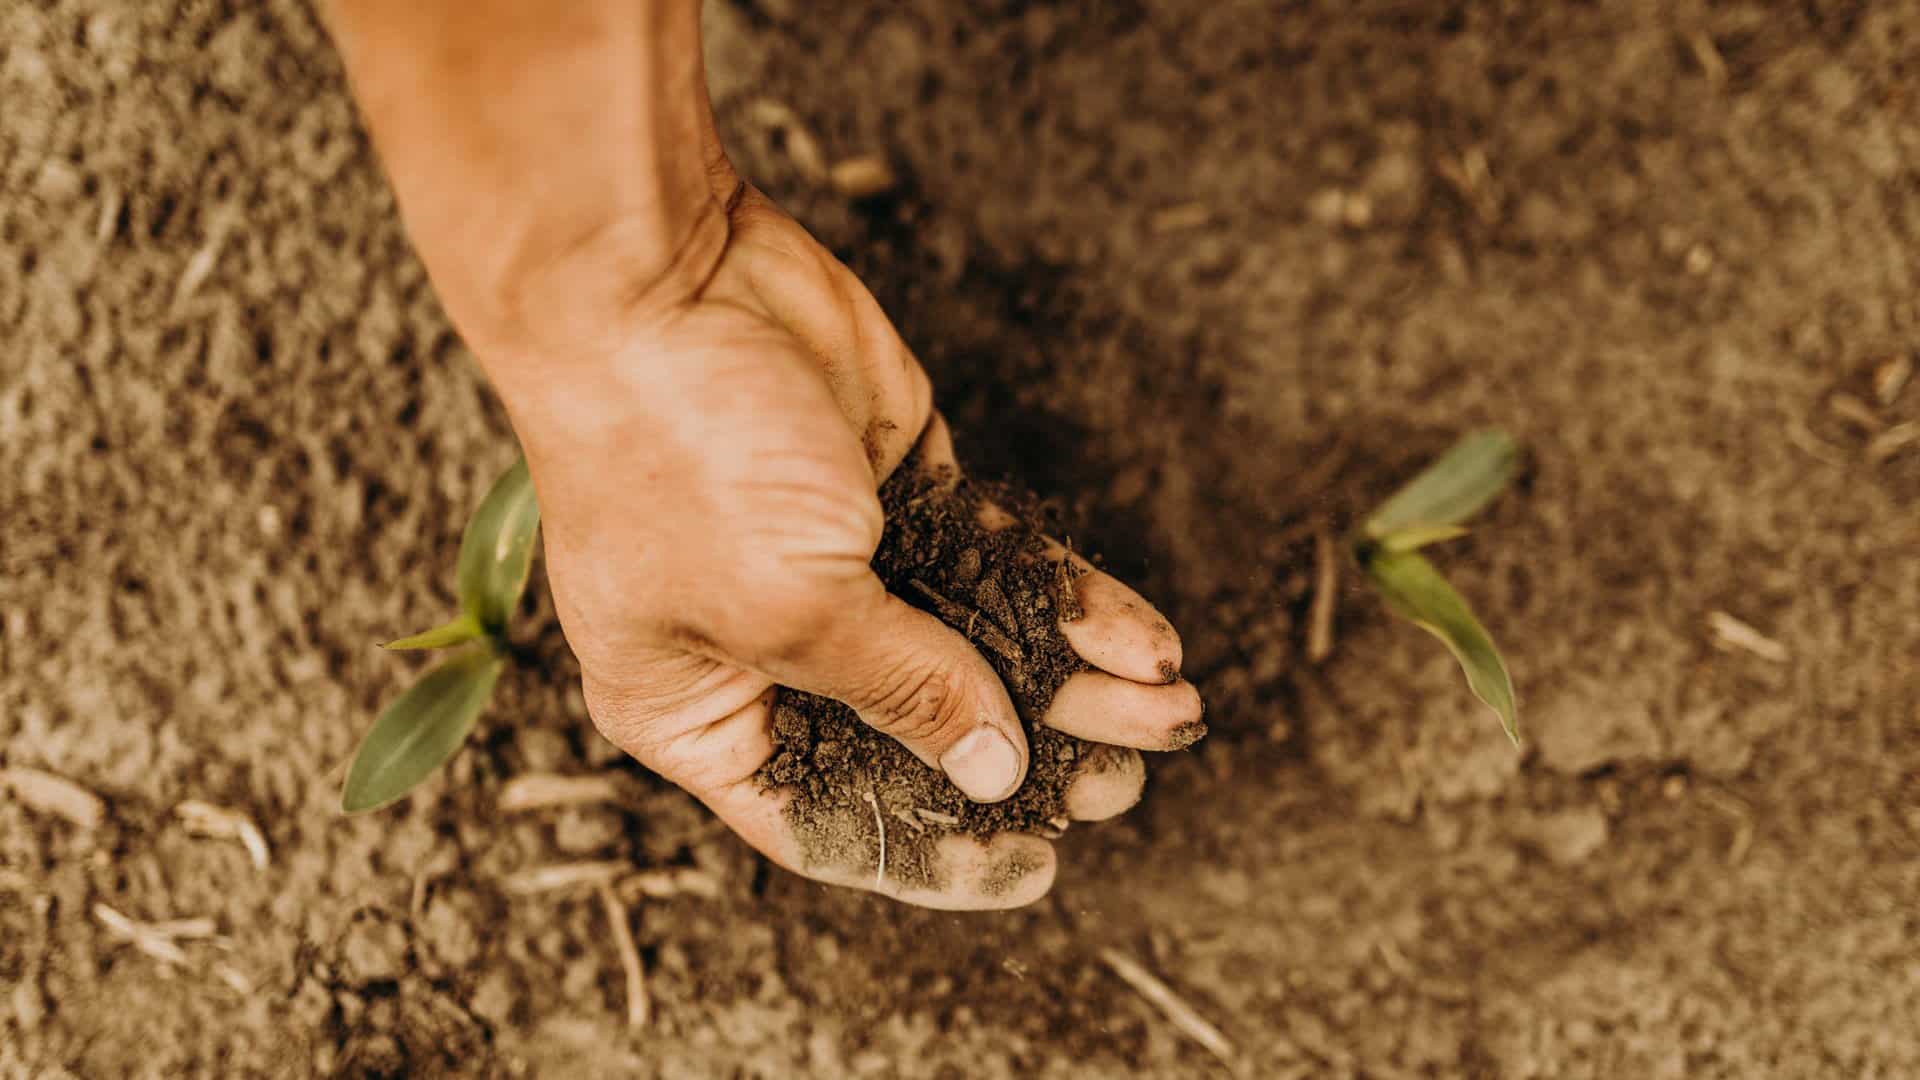 A man holds a handful of dirt in a cornfield.